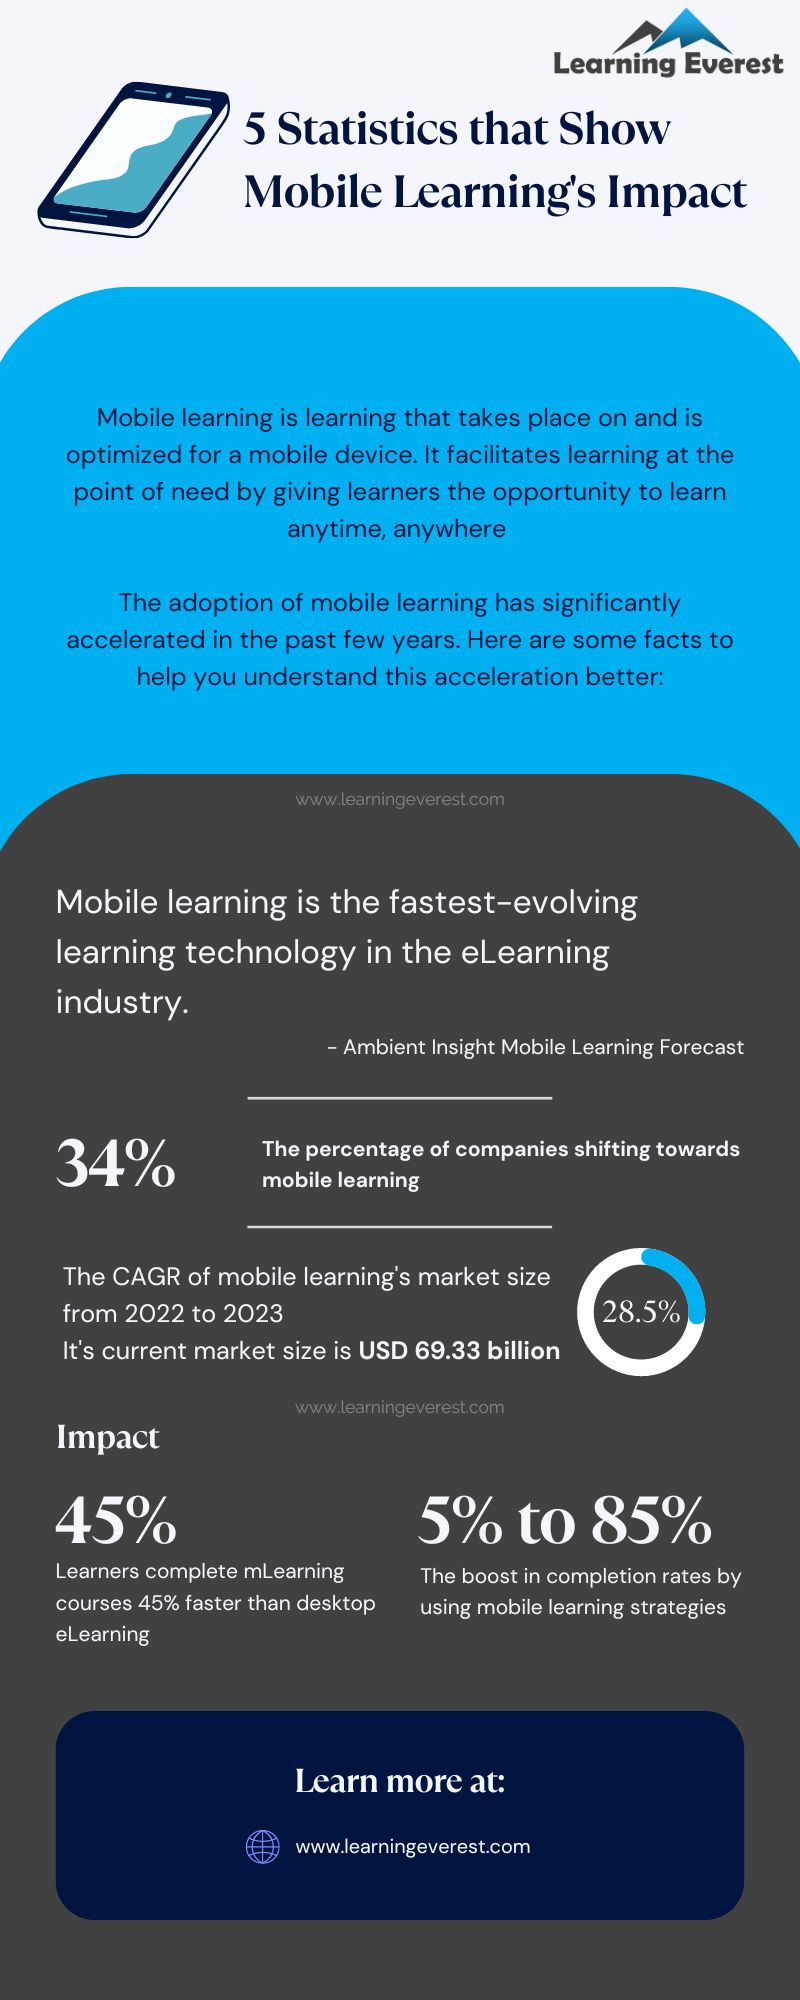 5 Statistics that Show Mobile Learning's Impact